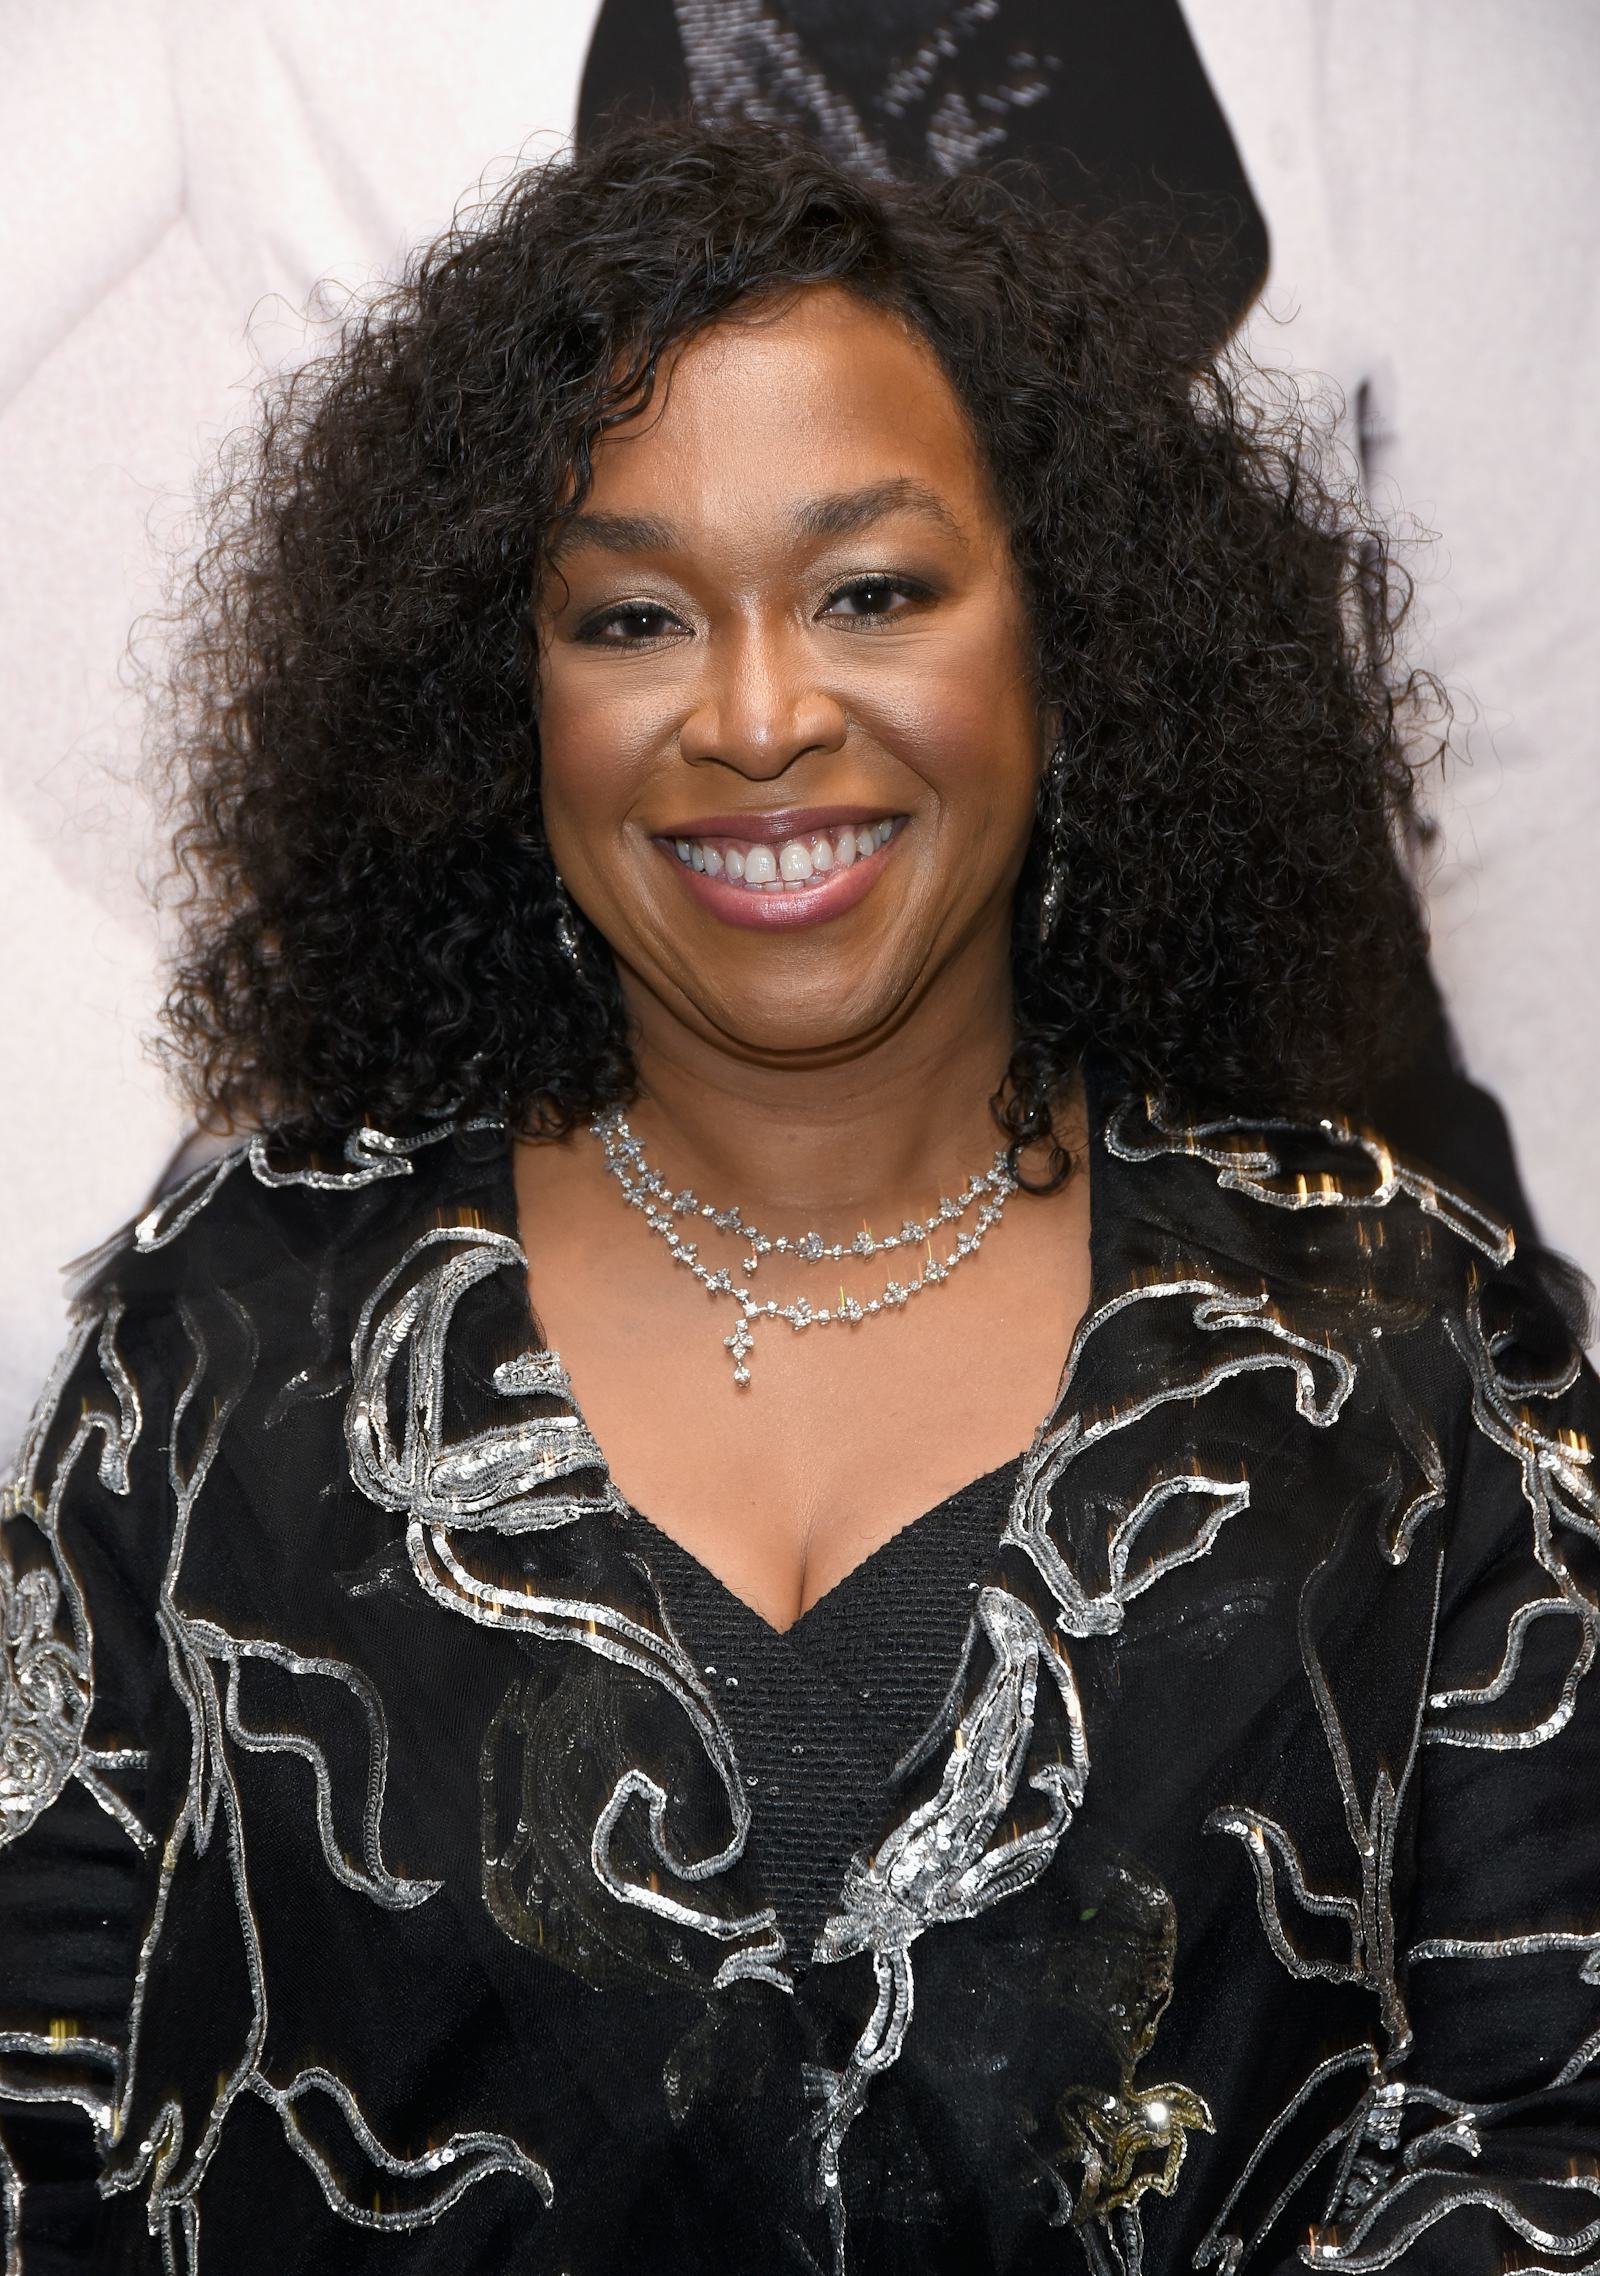 Shonda Rhimes Comments On Her Netflix Deal Are A Powerful Statement In